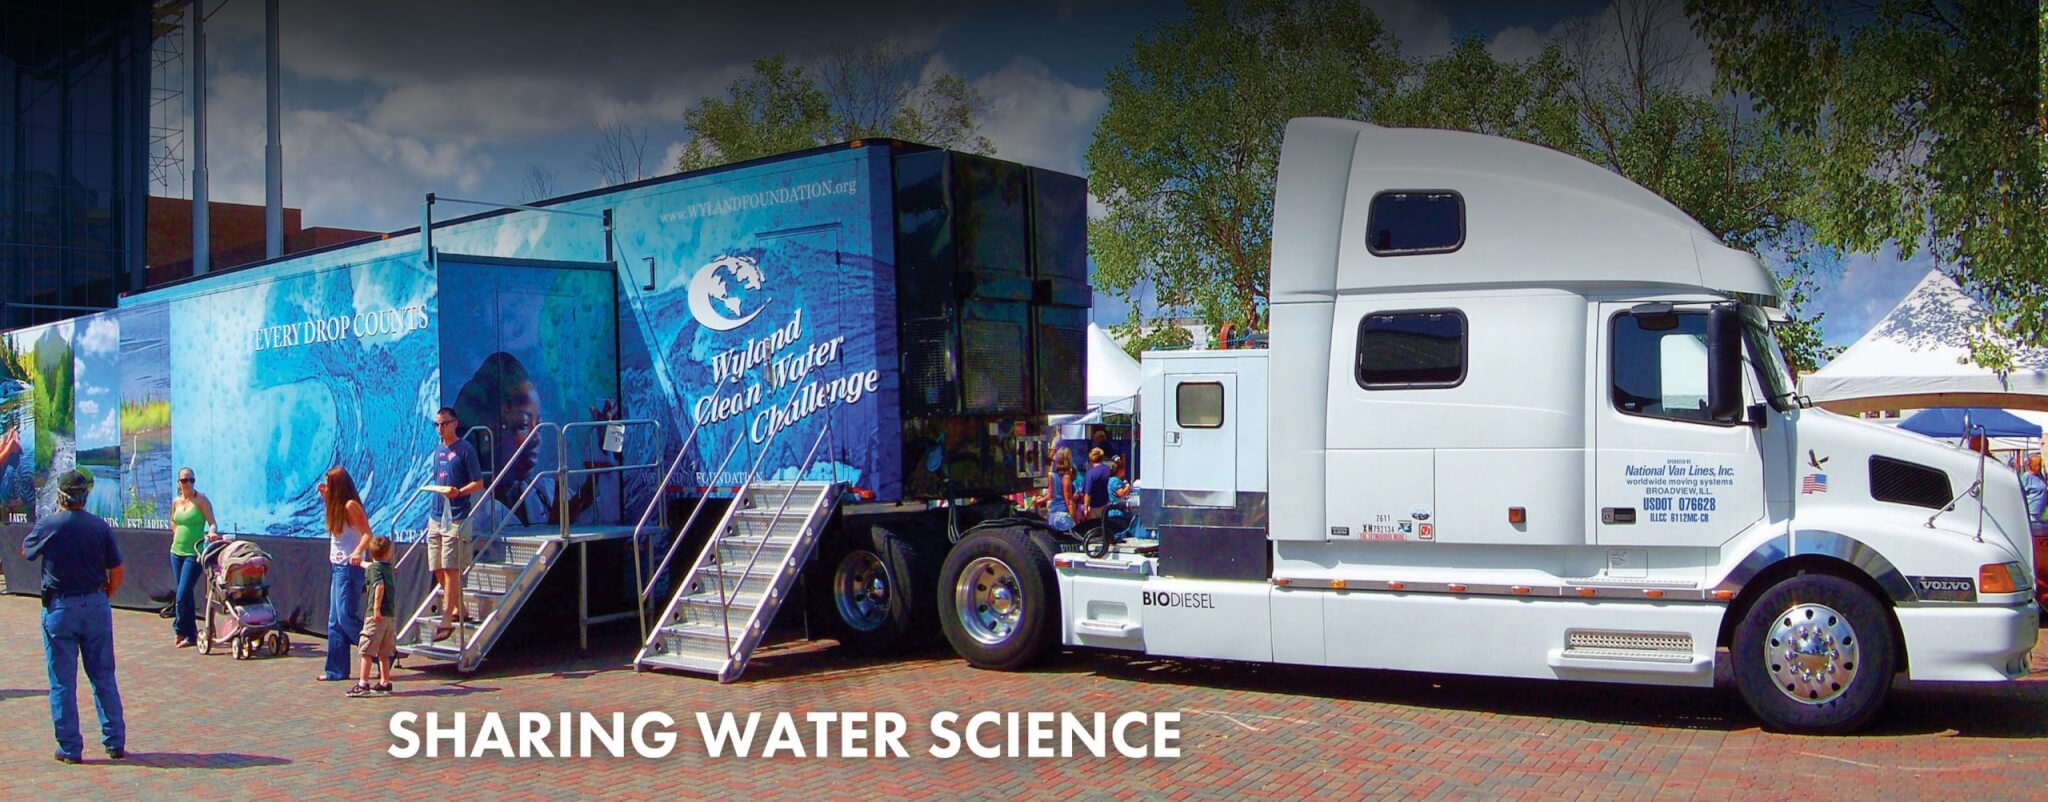 haring water science banner